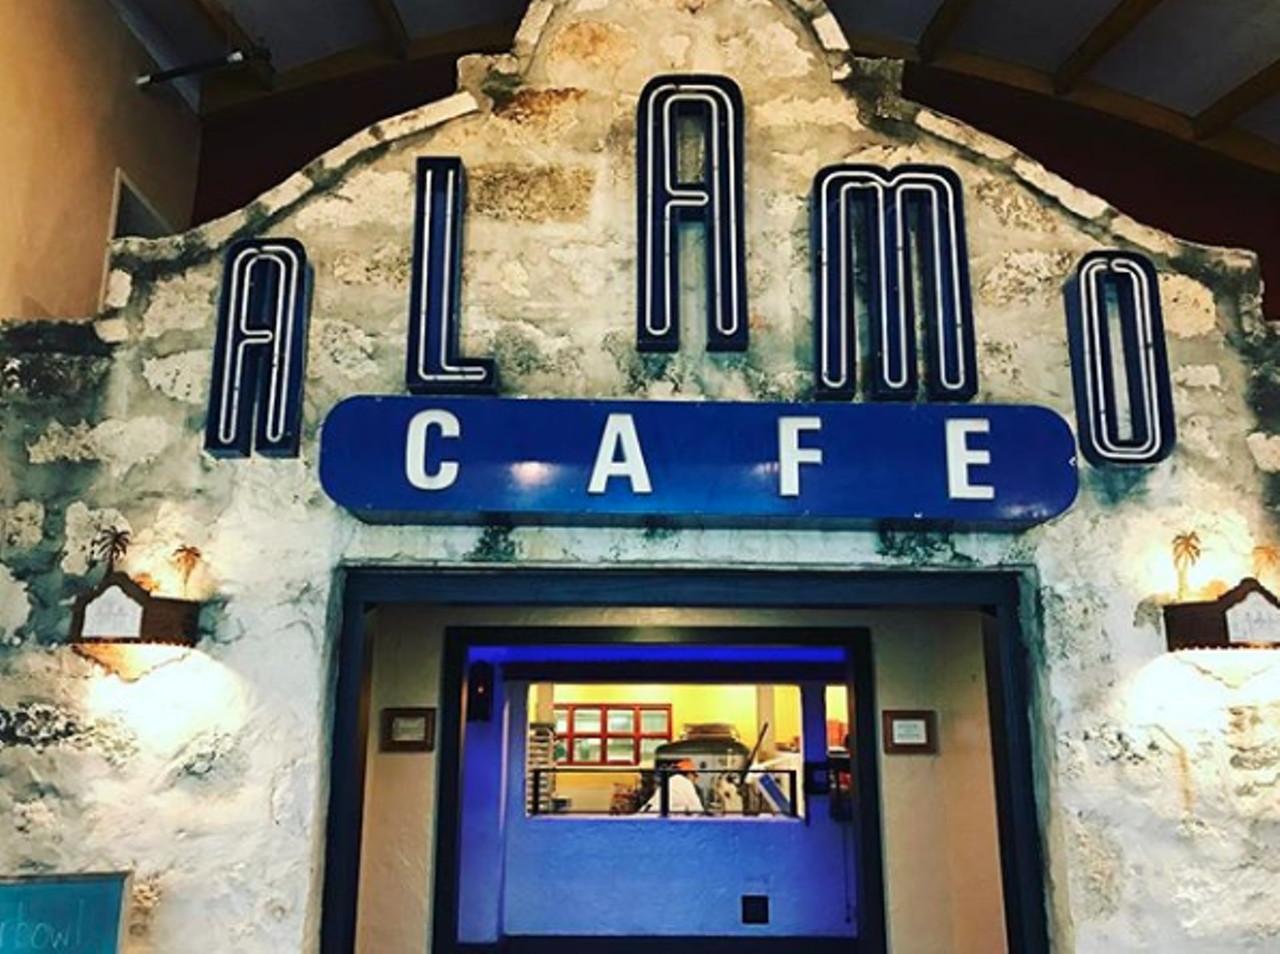 Alamo Cafe
Multiple locations, alamocafe.com
A San Antonio classic since 1981, Alamo Cafe is known for Tex-Mex dishes. If you’re just in the mood for American dishes, then go for the chicken fried chicken, served with creamy gravy. If you aren’t completely stuffed, choose from one of four cheesecakes.
Photo via Instagram / patrickmaese